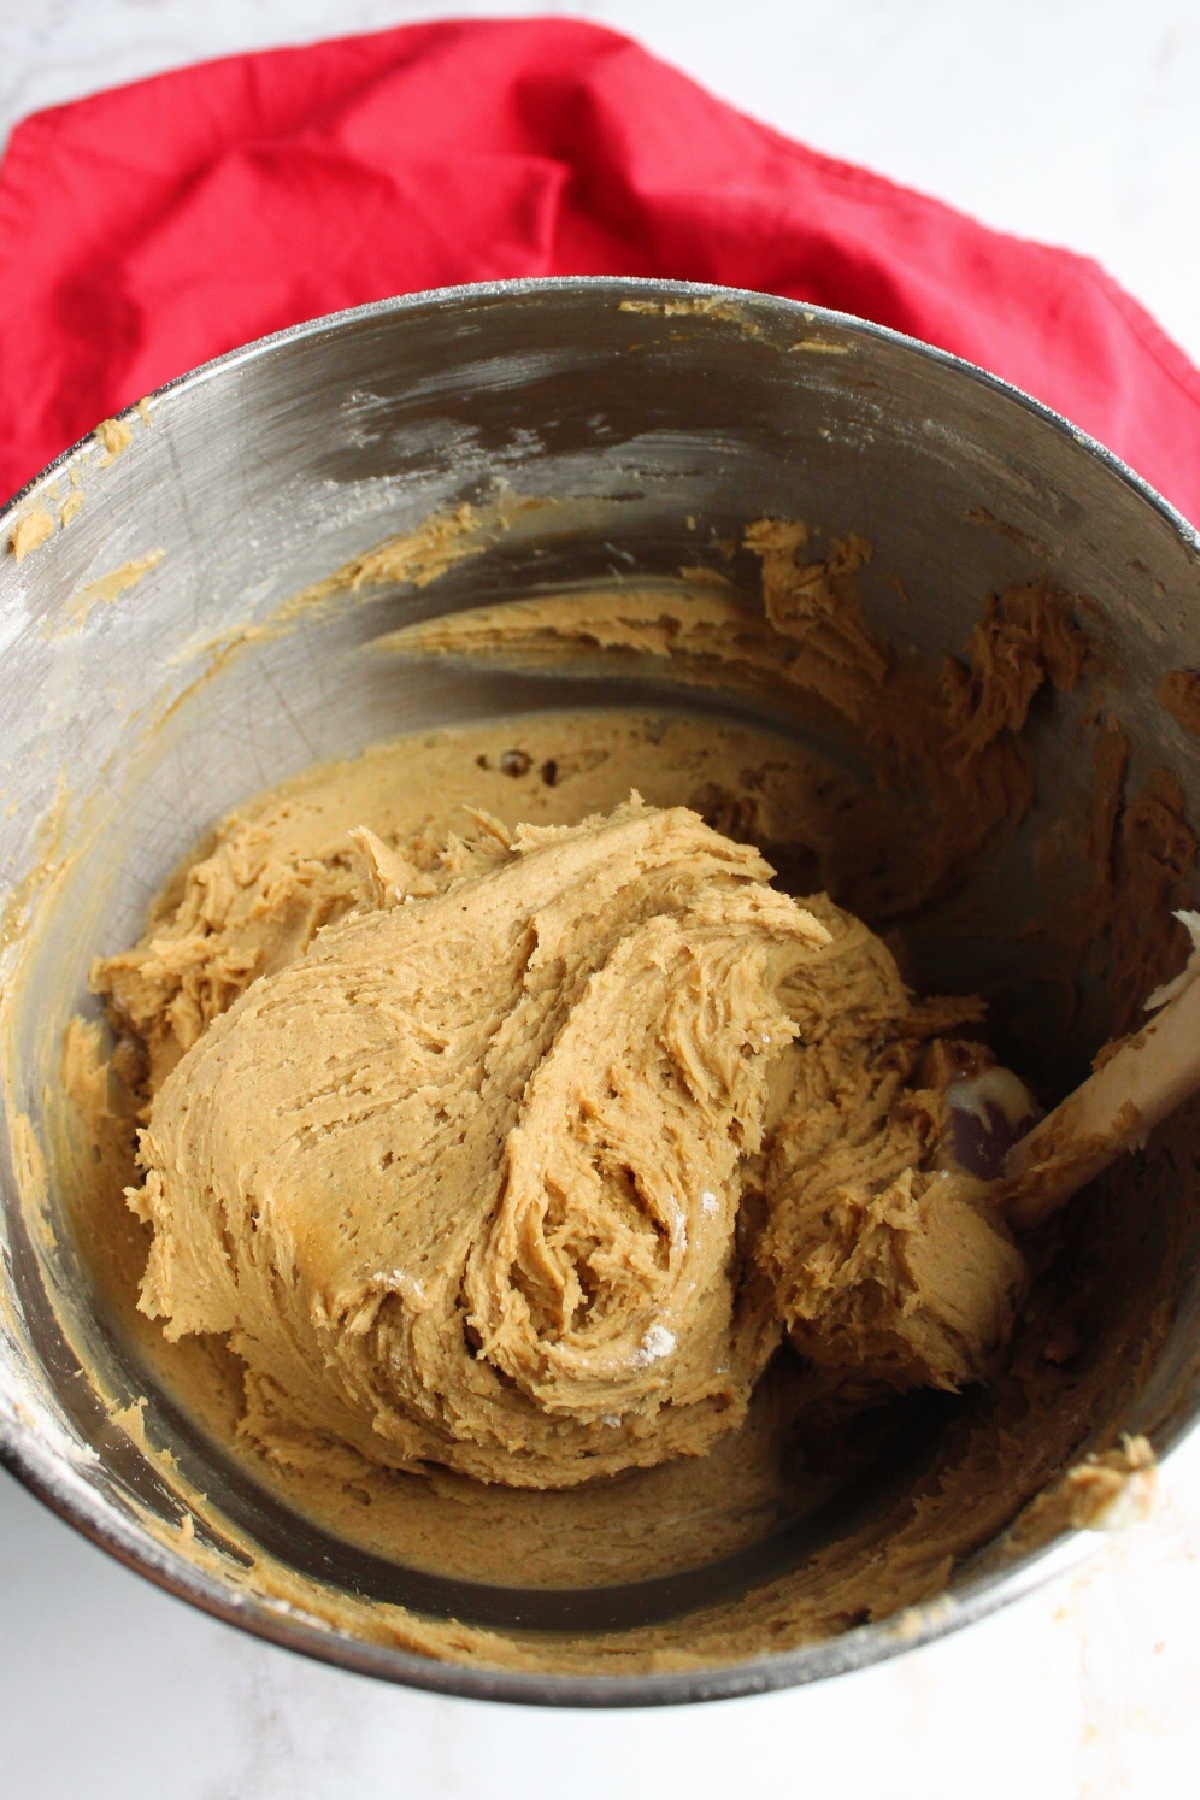 Bowl of gingerbread cookie dough.